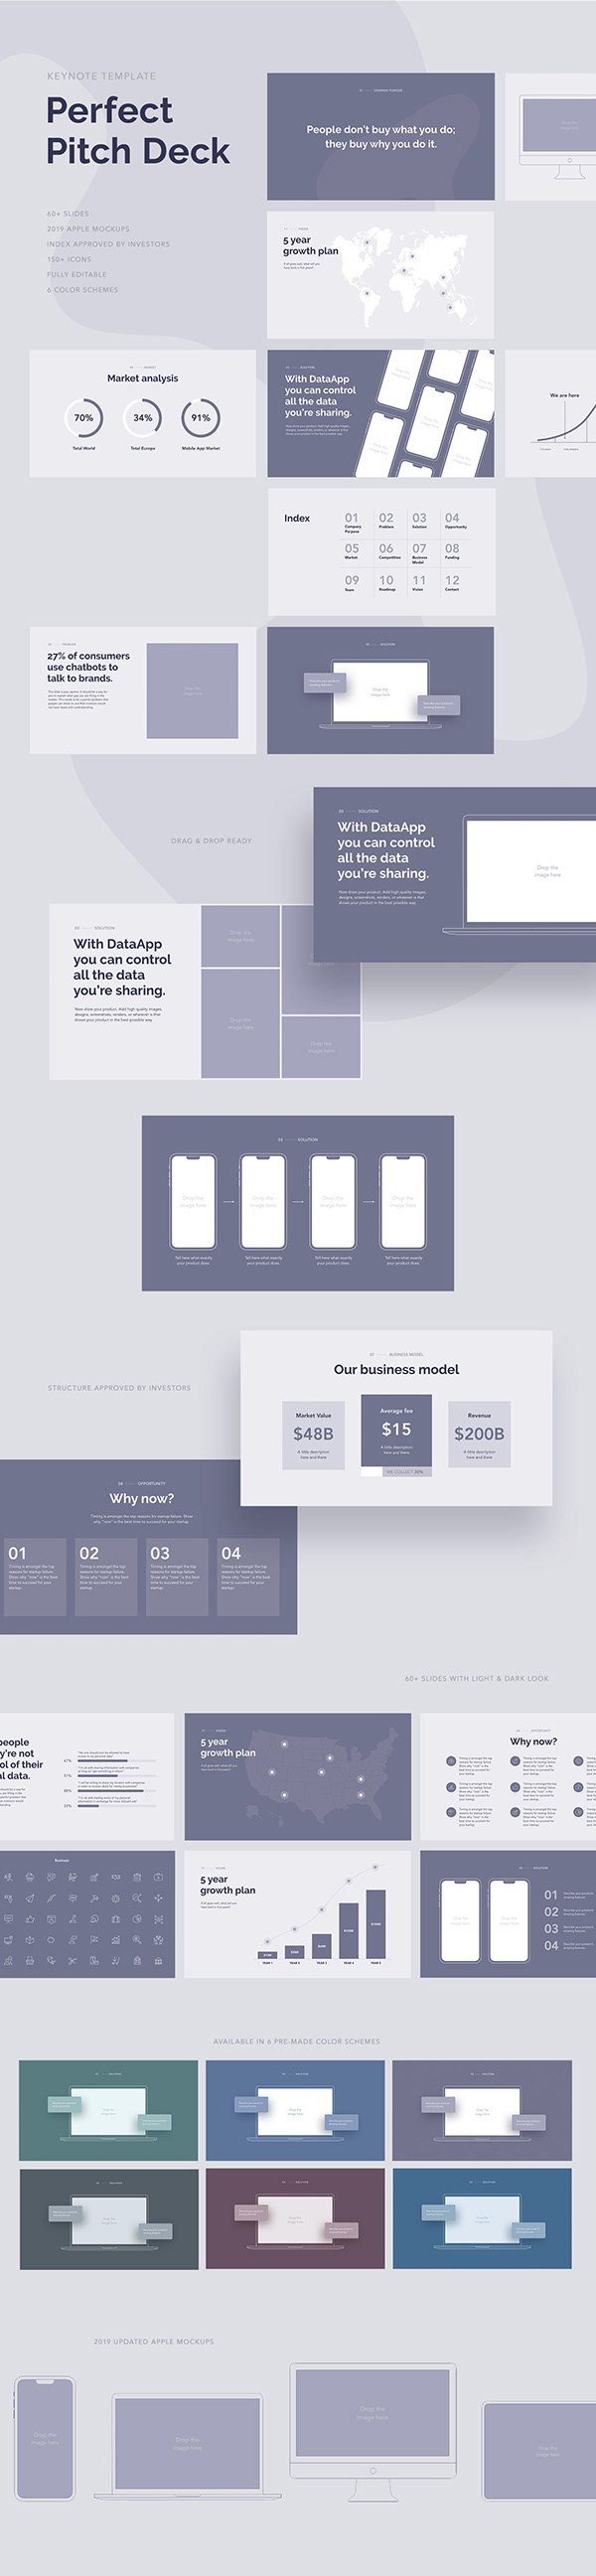 Perfect Pitch Deck Keynote Template